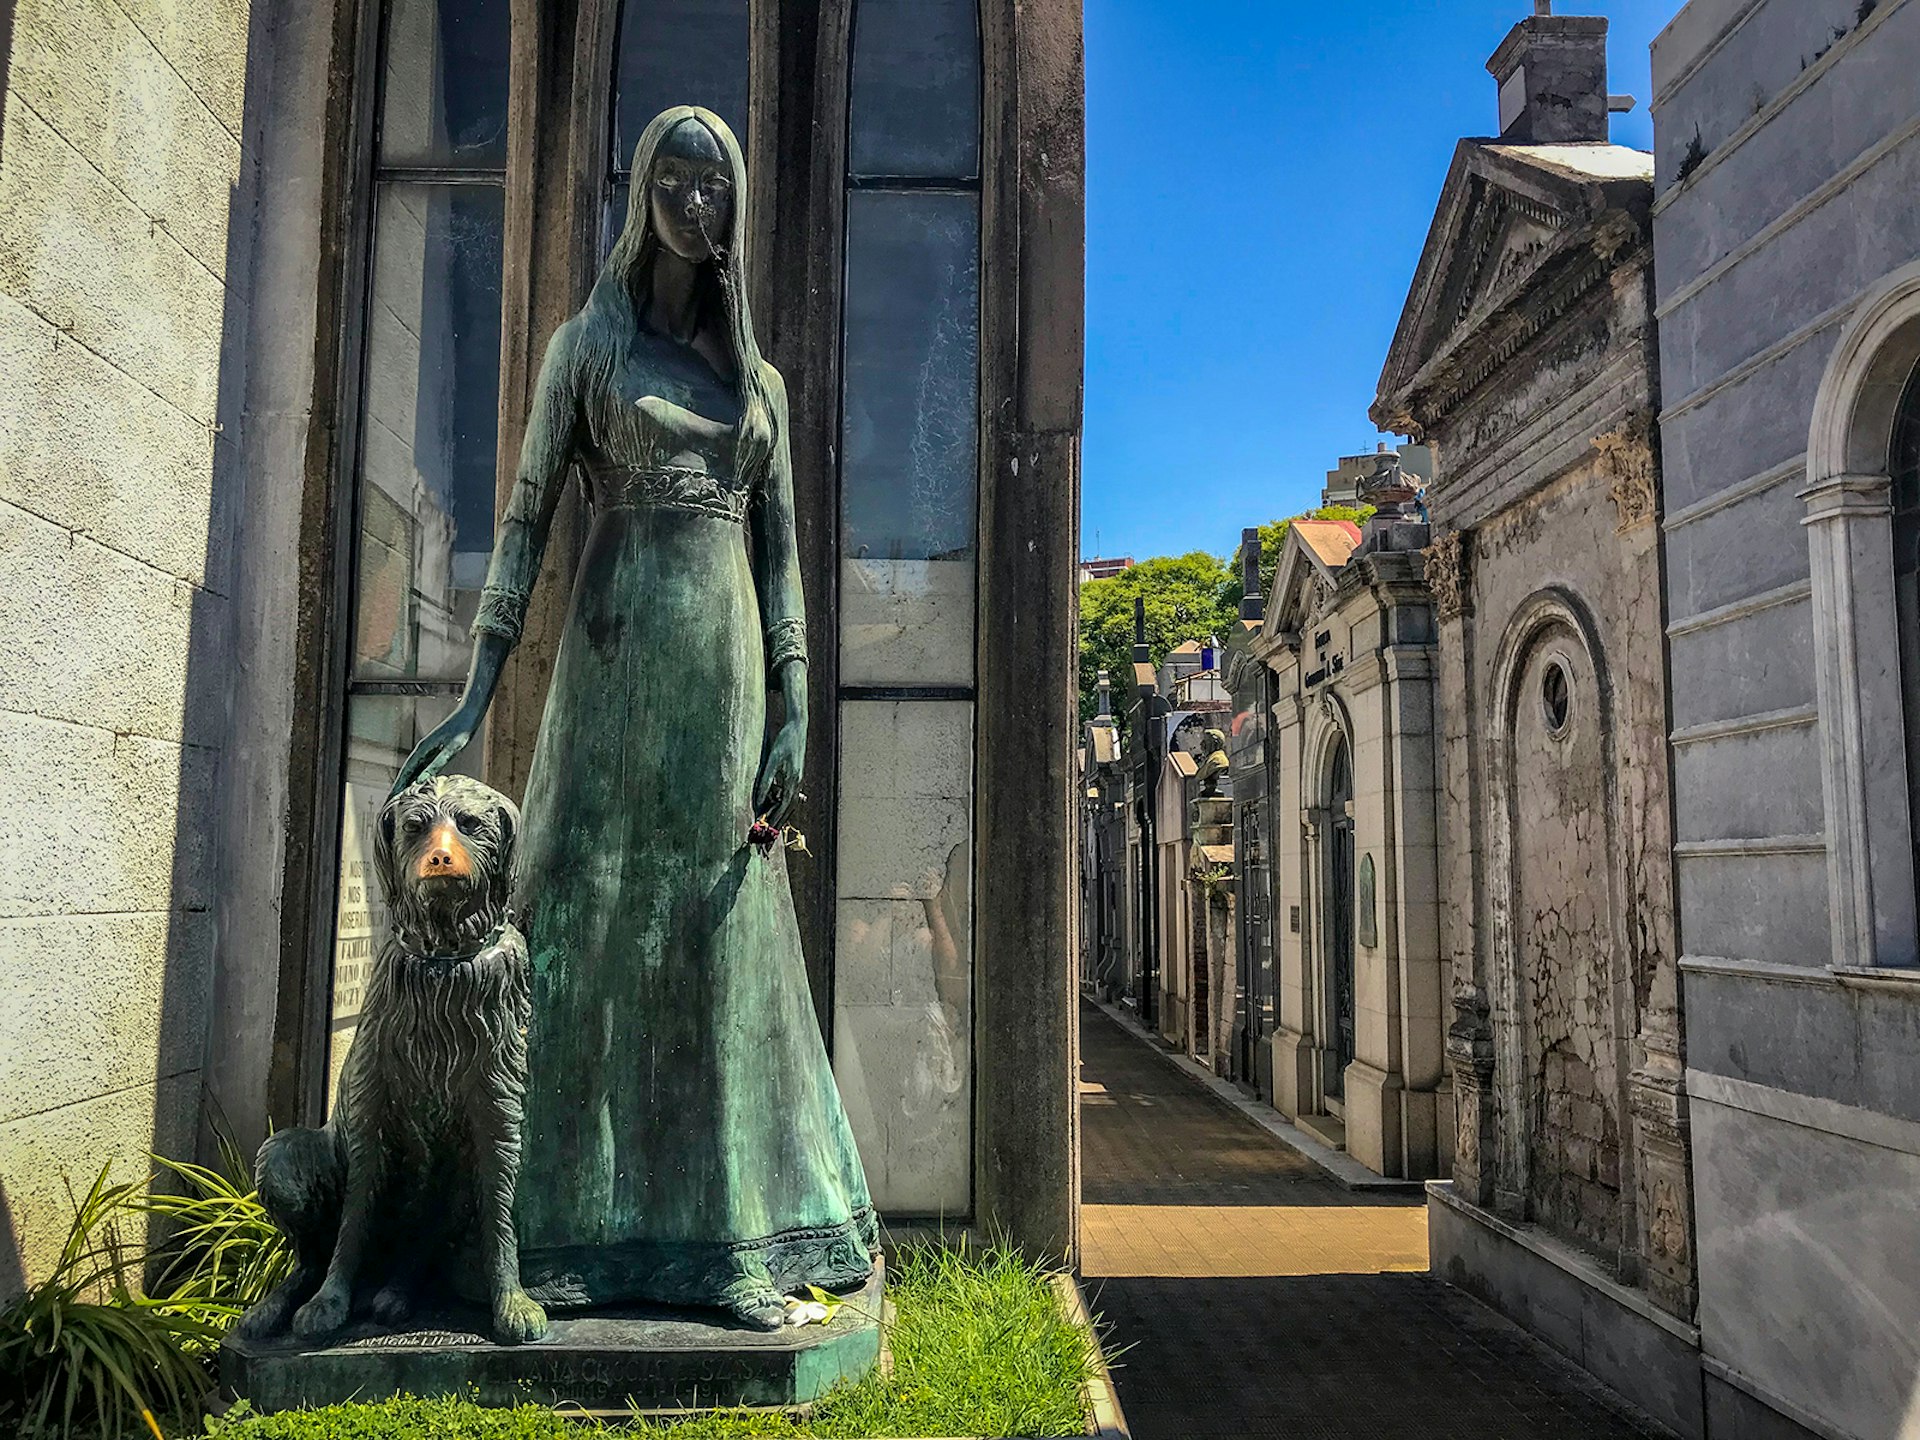 A statue of a woman with long hair petting a dog sitting at her side, with a row of mausoleums in the background